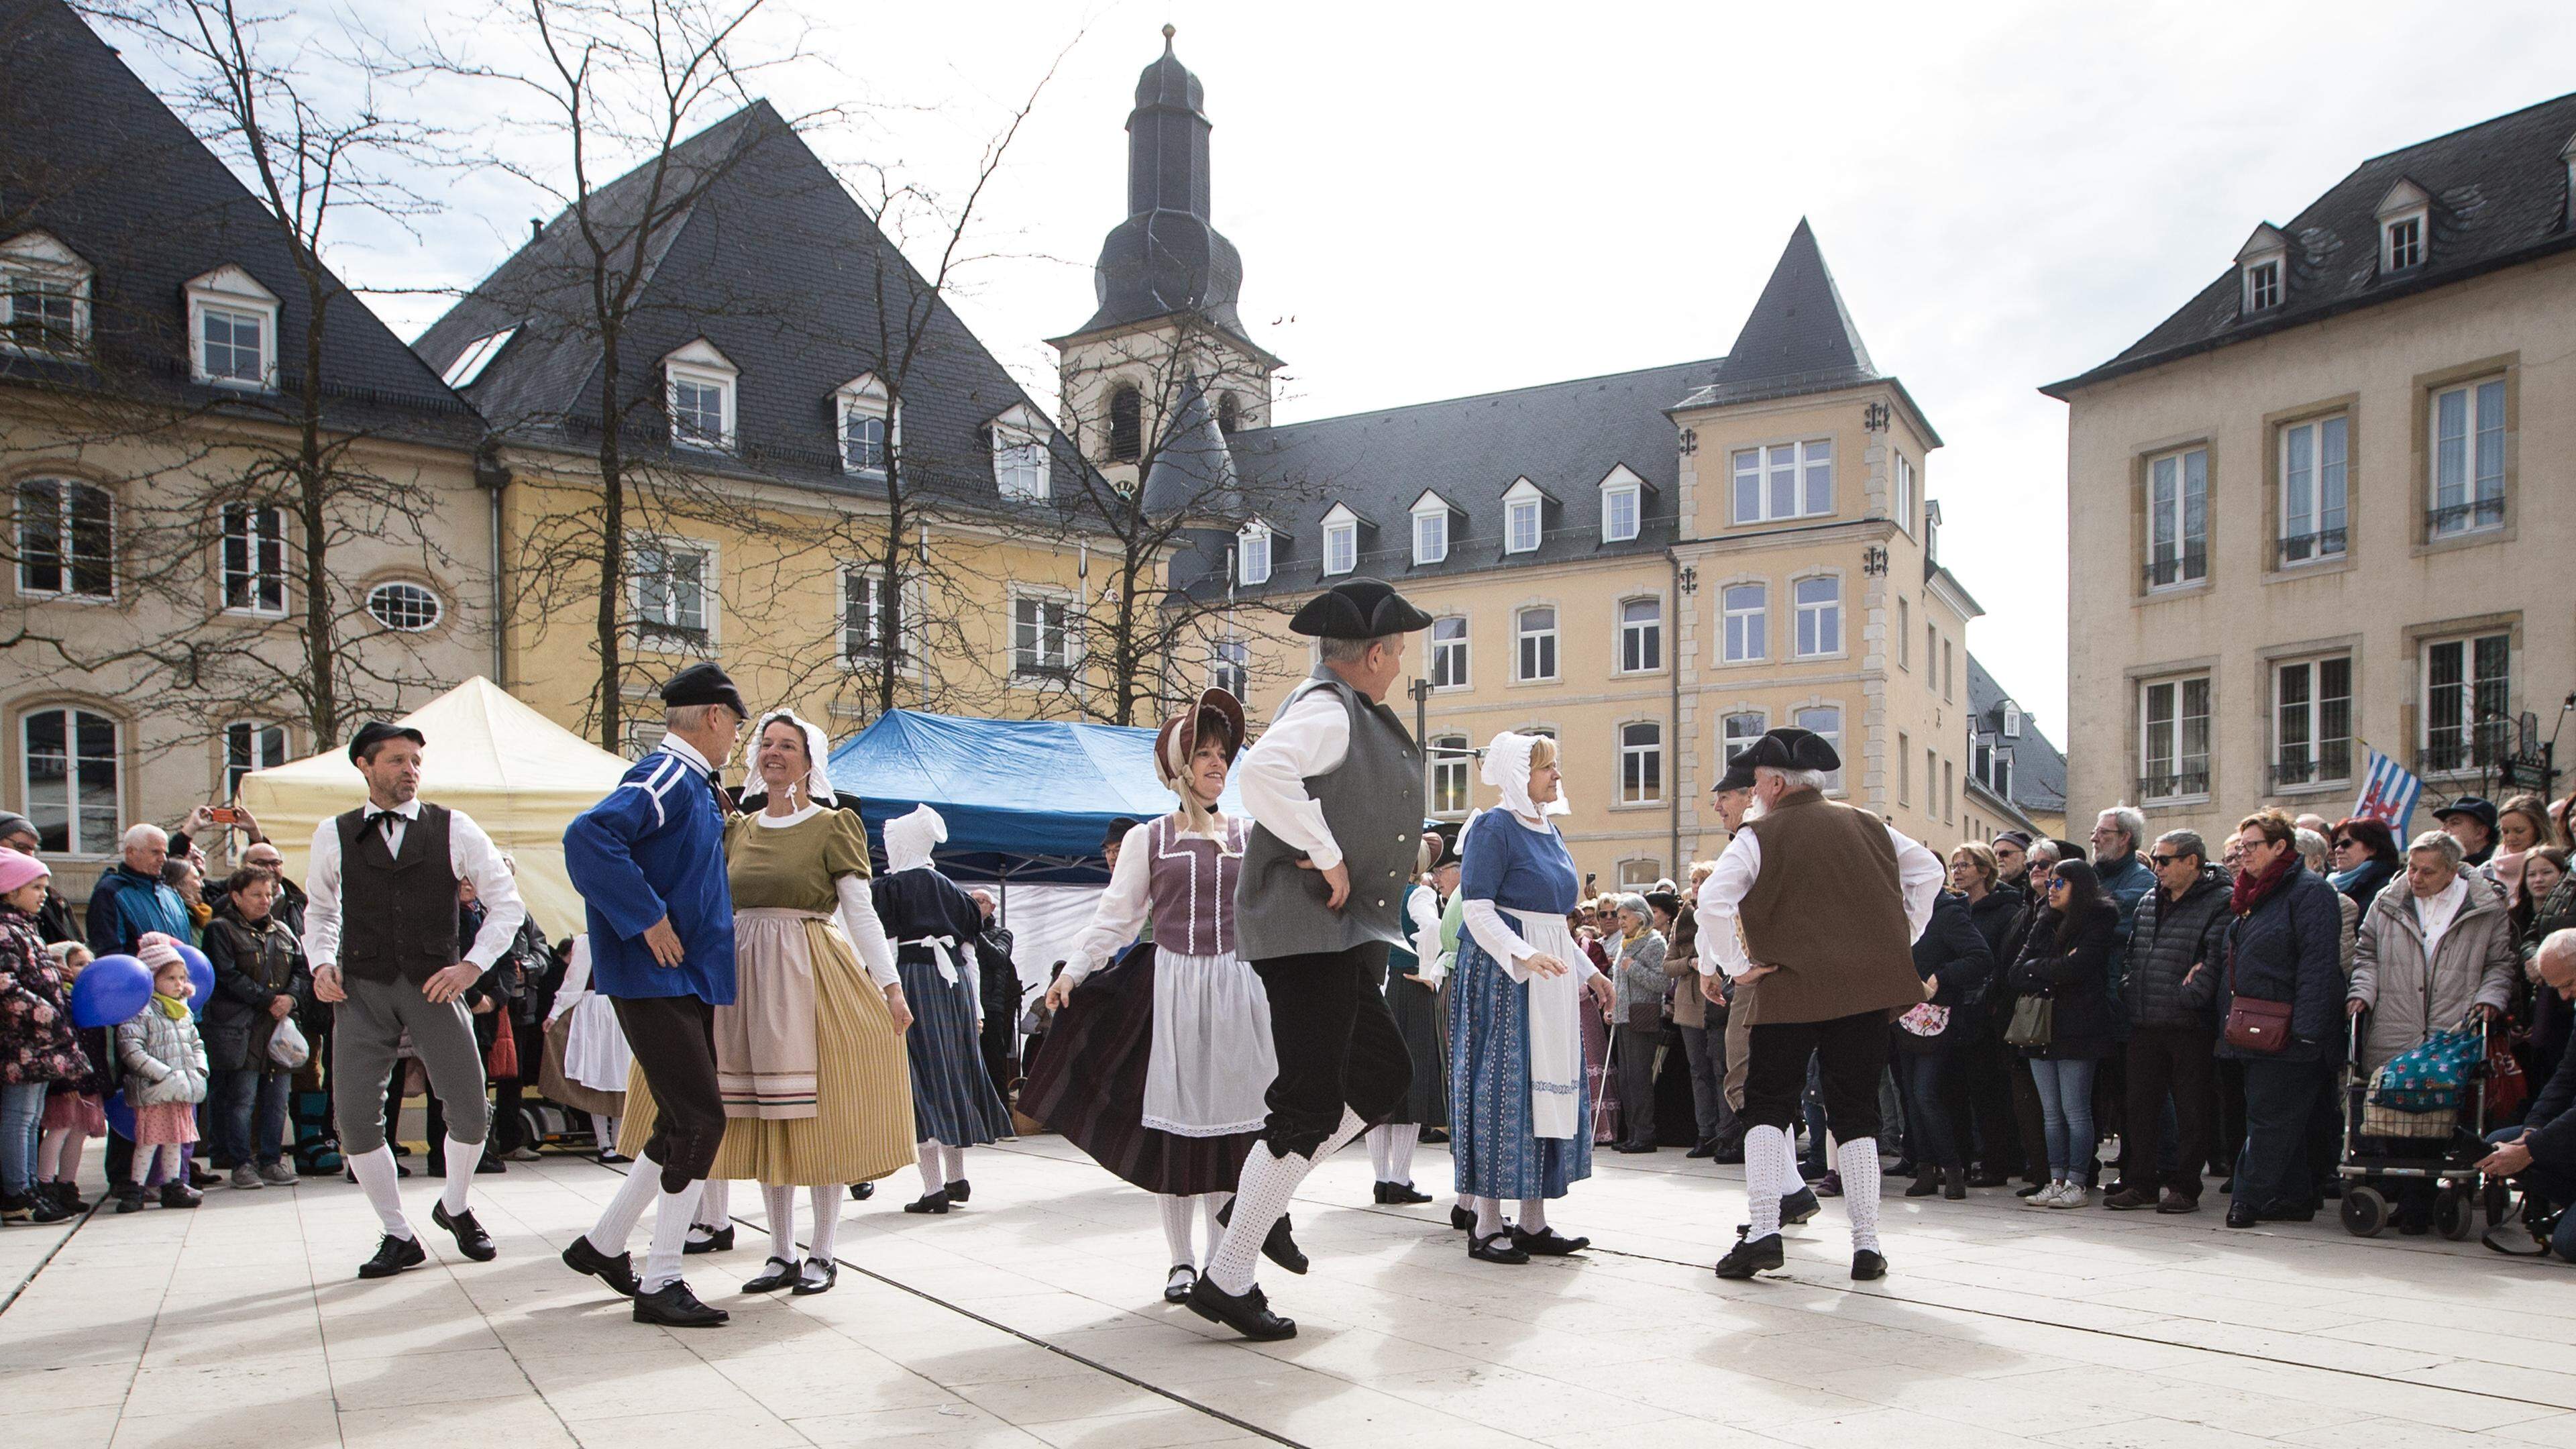 A folk dance display on Easter Monday in Luxembourg, 2018.